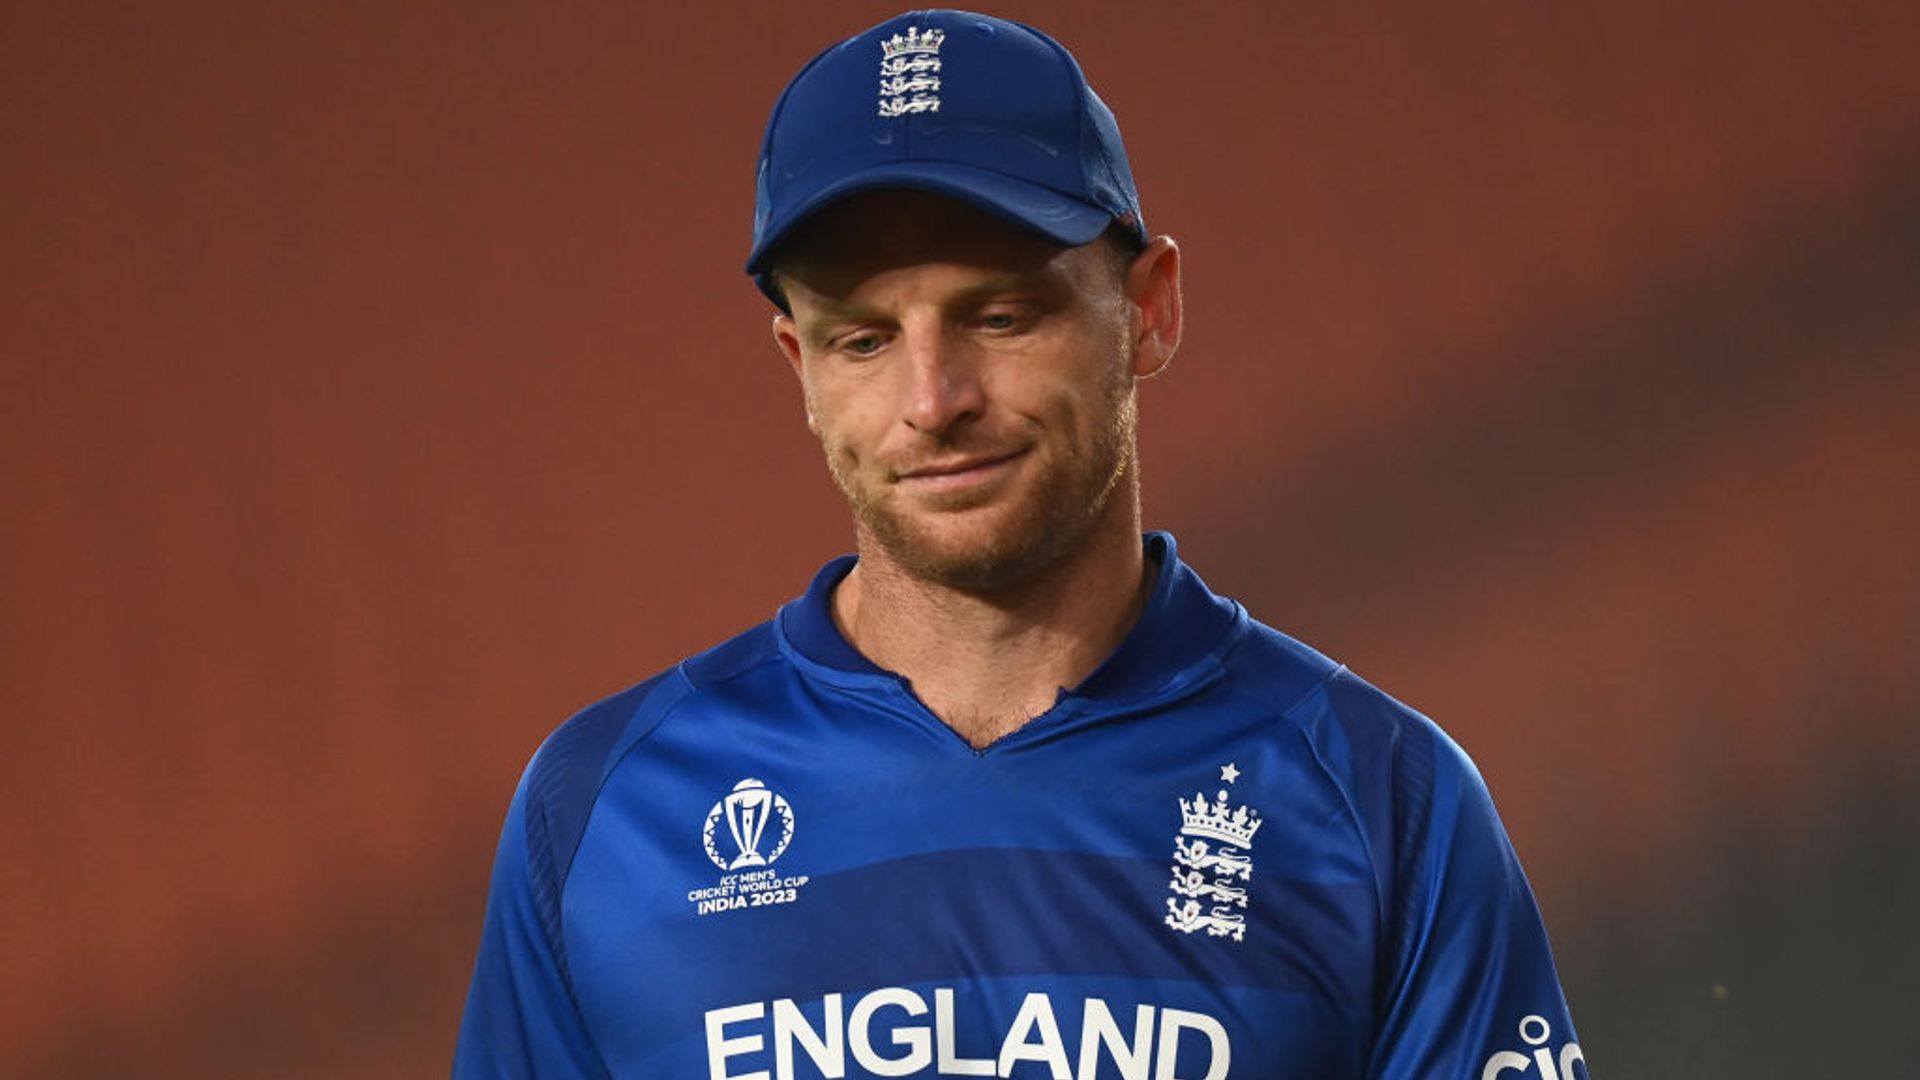 Buttler: My own form is the biggest concern